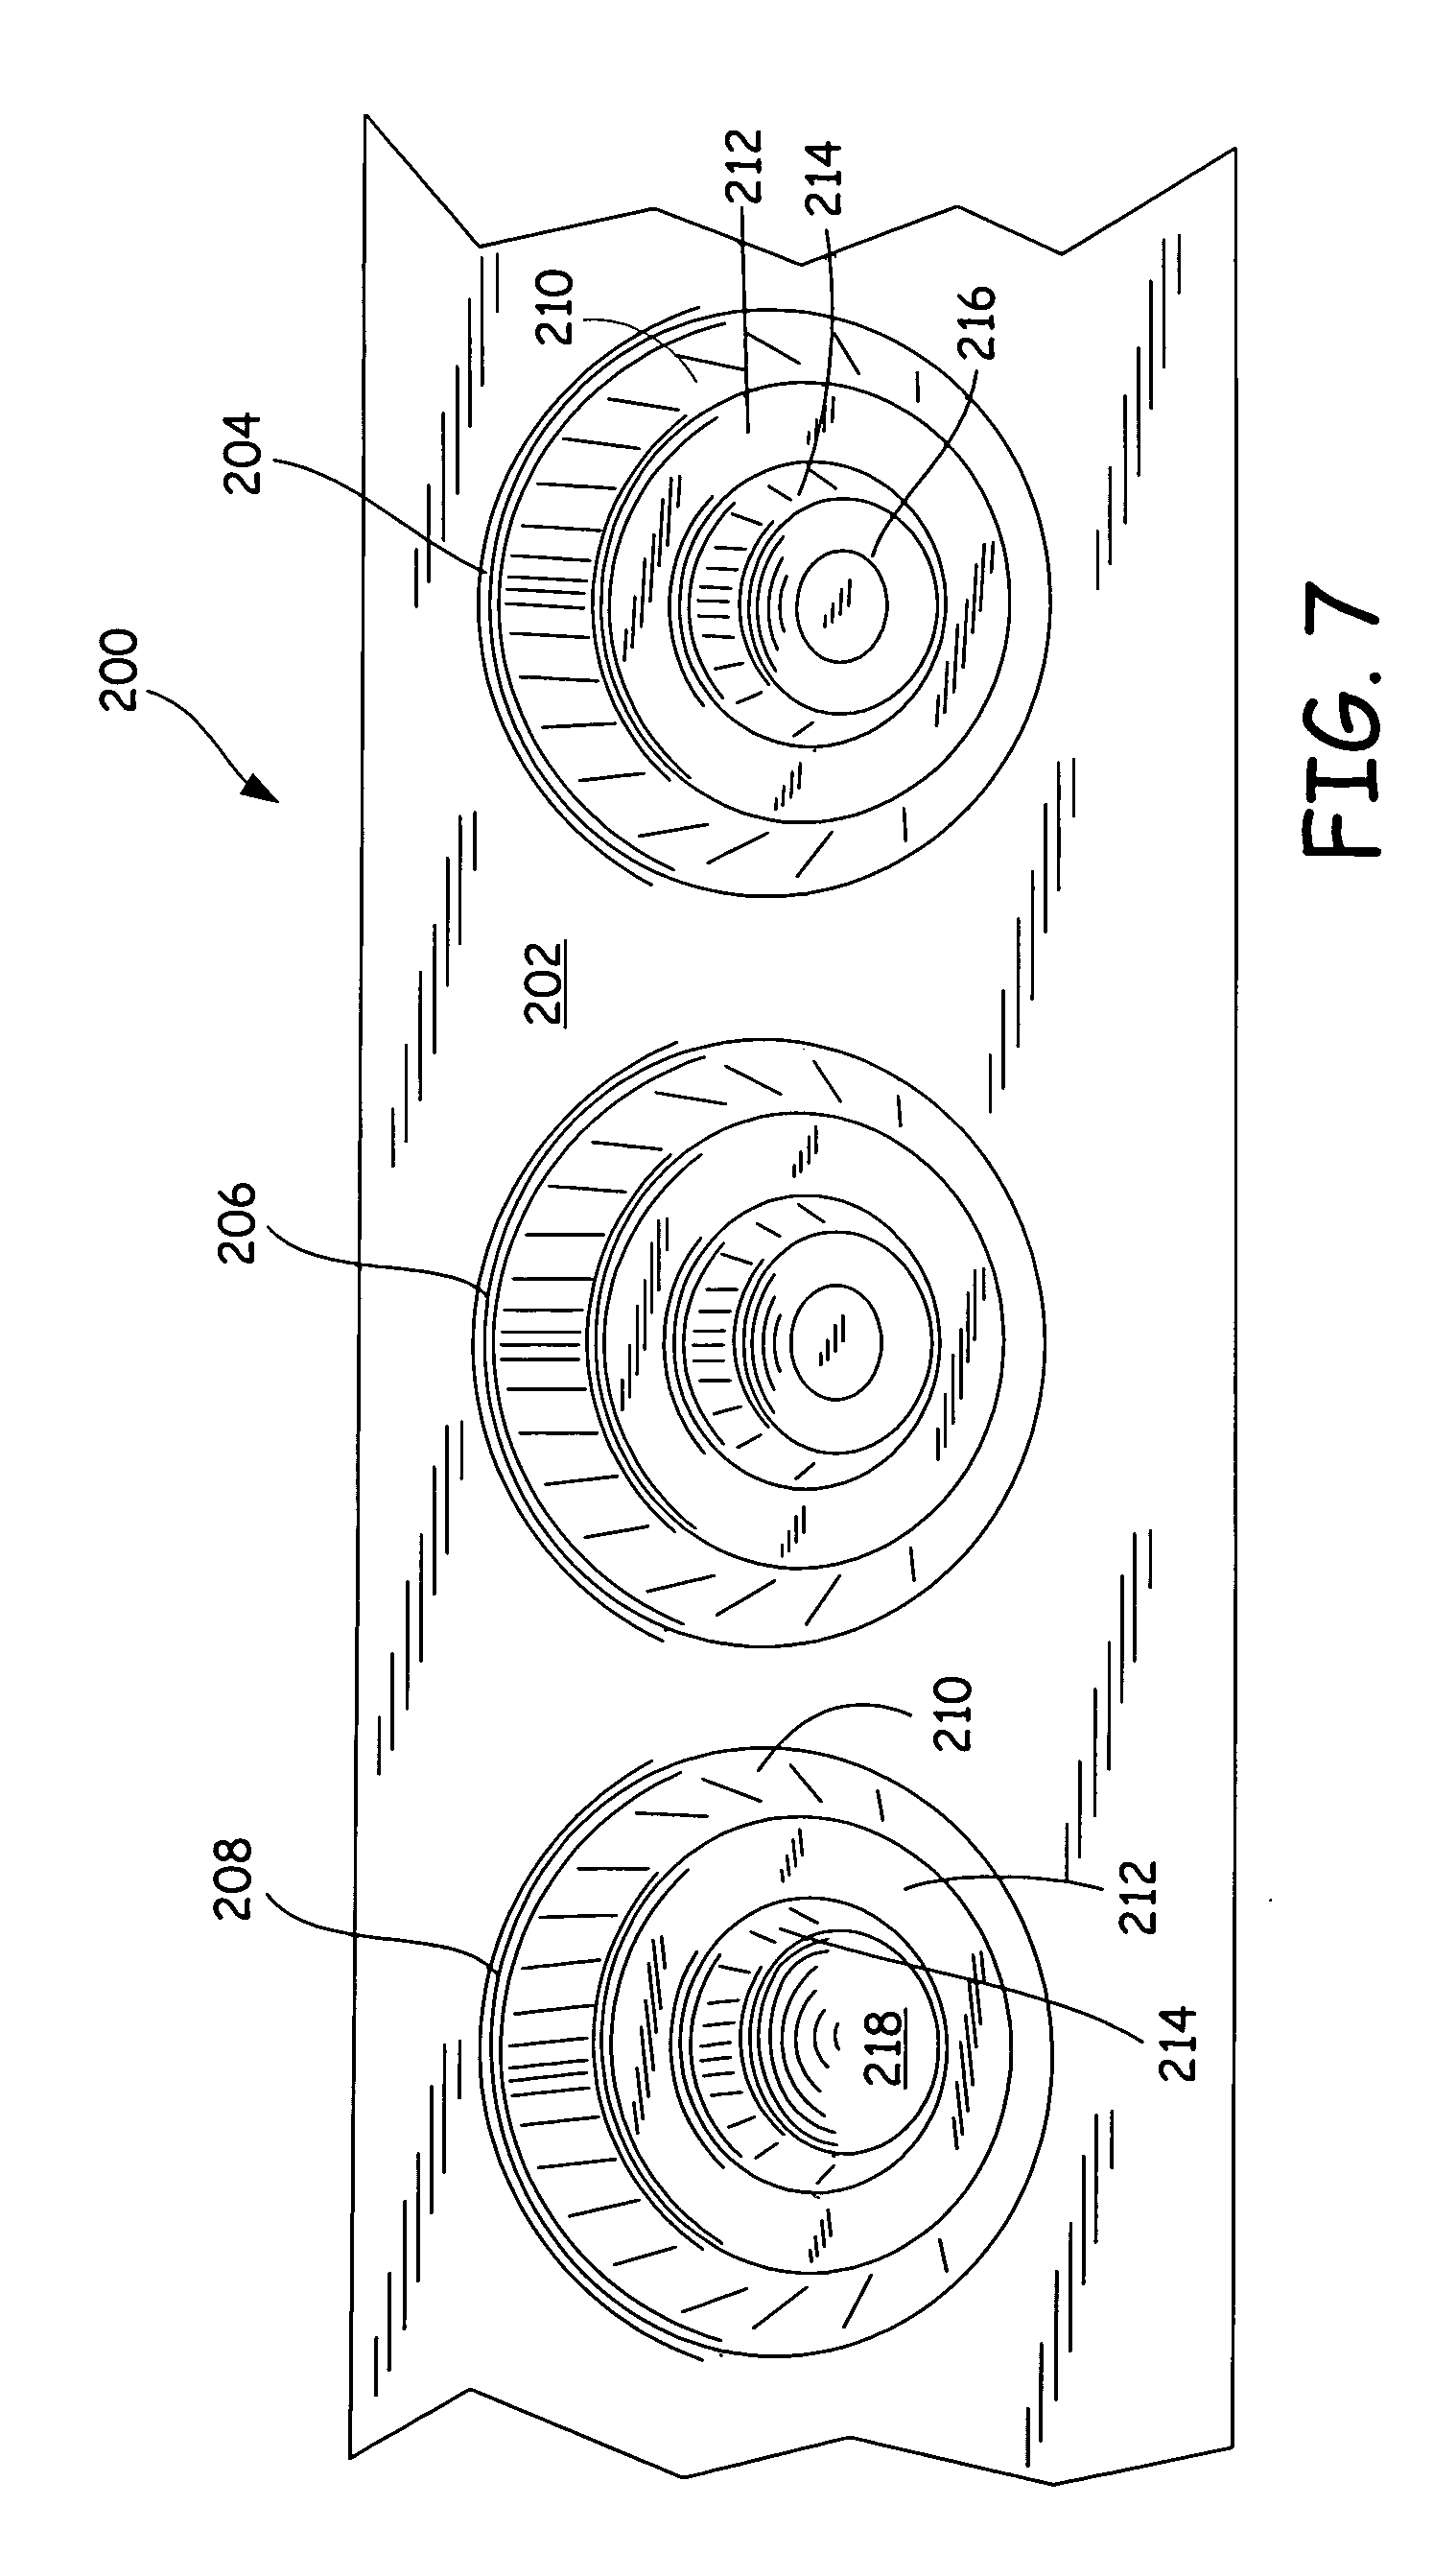 Methods and devices for automatically making large quantities of pre-cooked eggs having a natural appearance